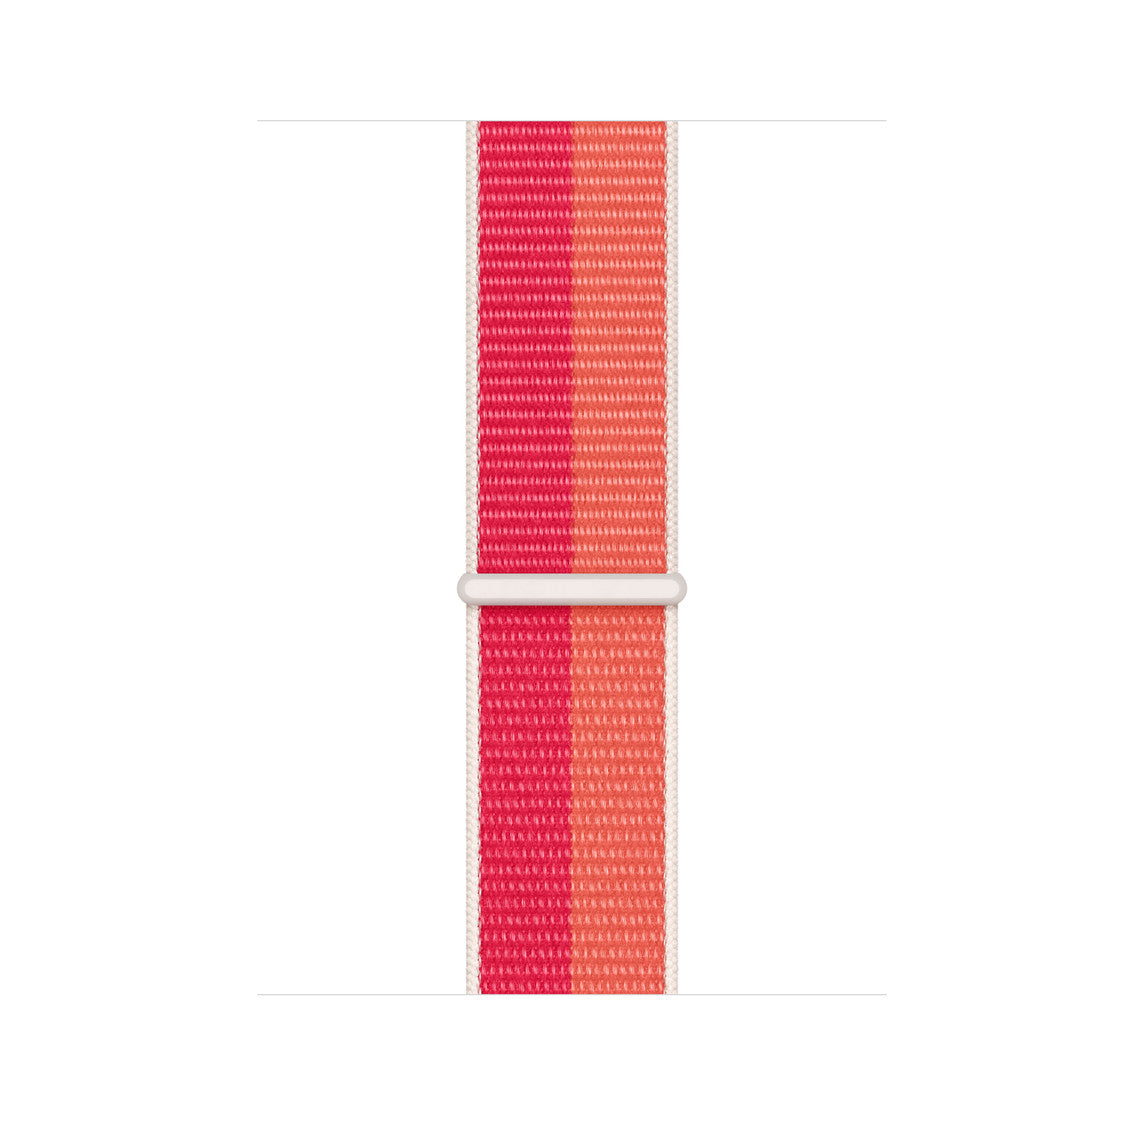 Nectarine/Peony Sports Loop for iWatch 38mm, 40mm & 41mm Series 1 2 3 4 5 6 7 8(Watch Not Included)